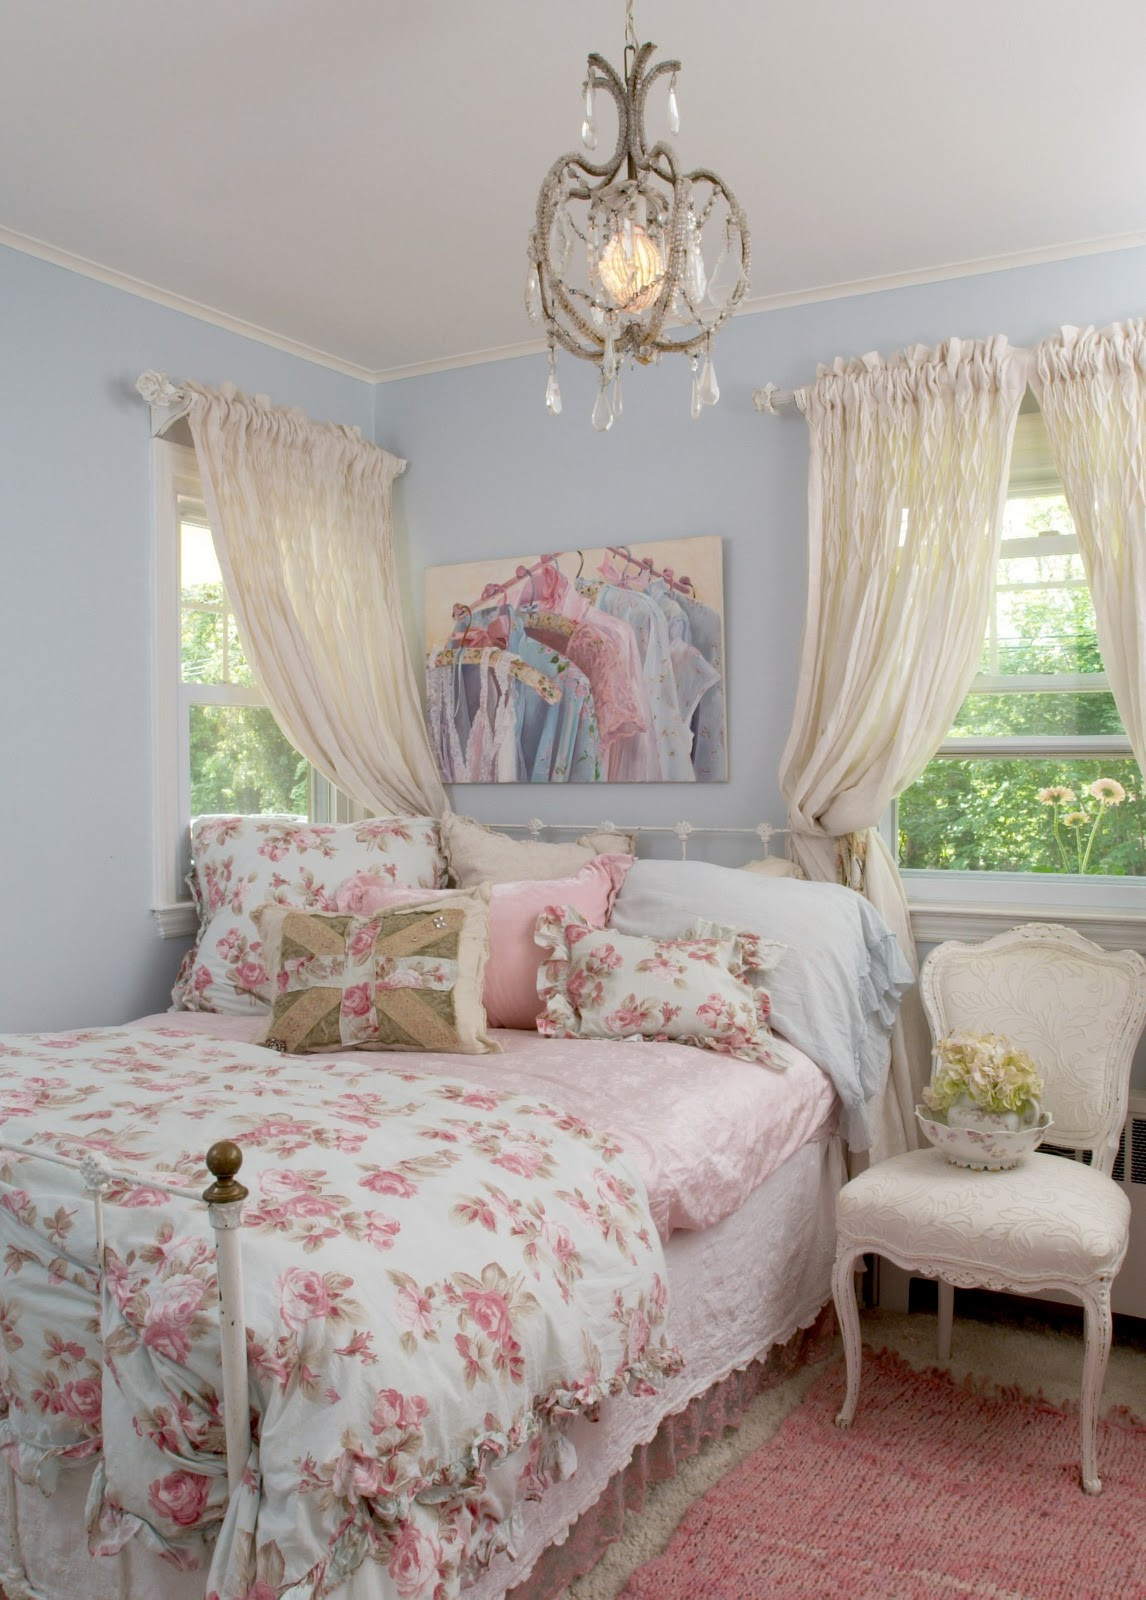 Images Of Shabby Chic Bedrooms
 Maison Decor My Shabby Bedroom Makeover Plan